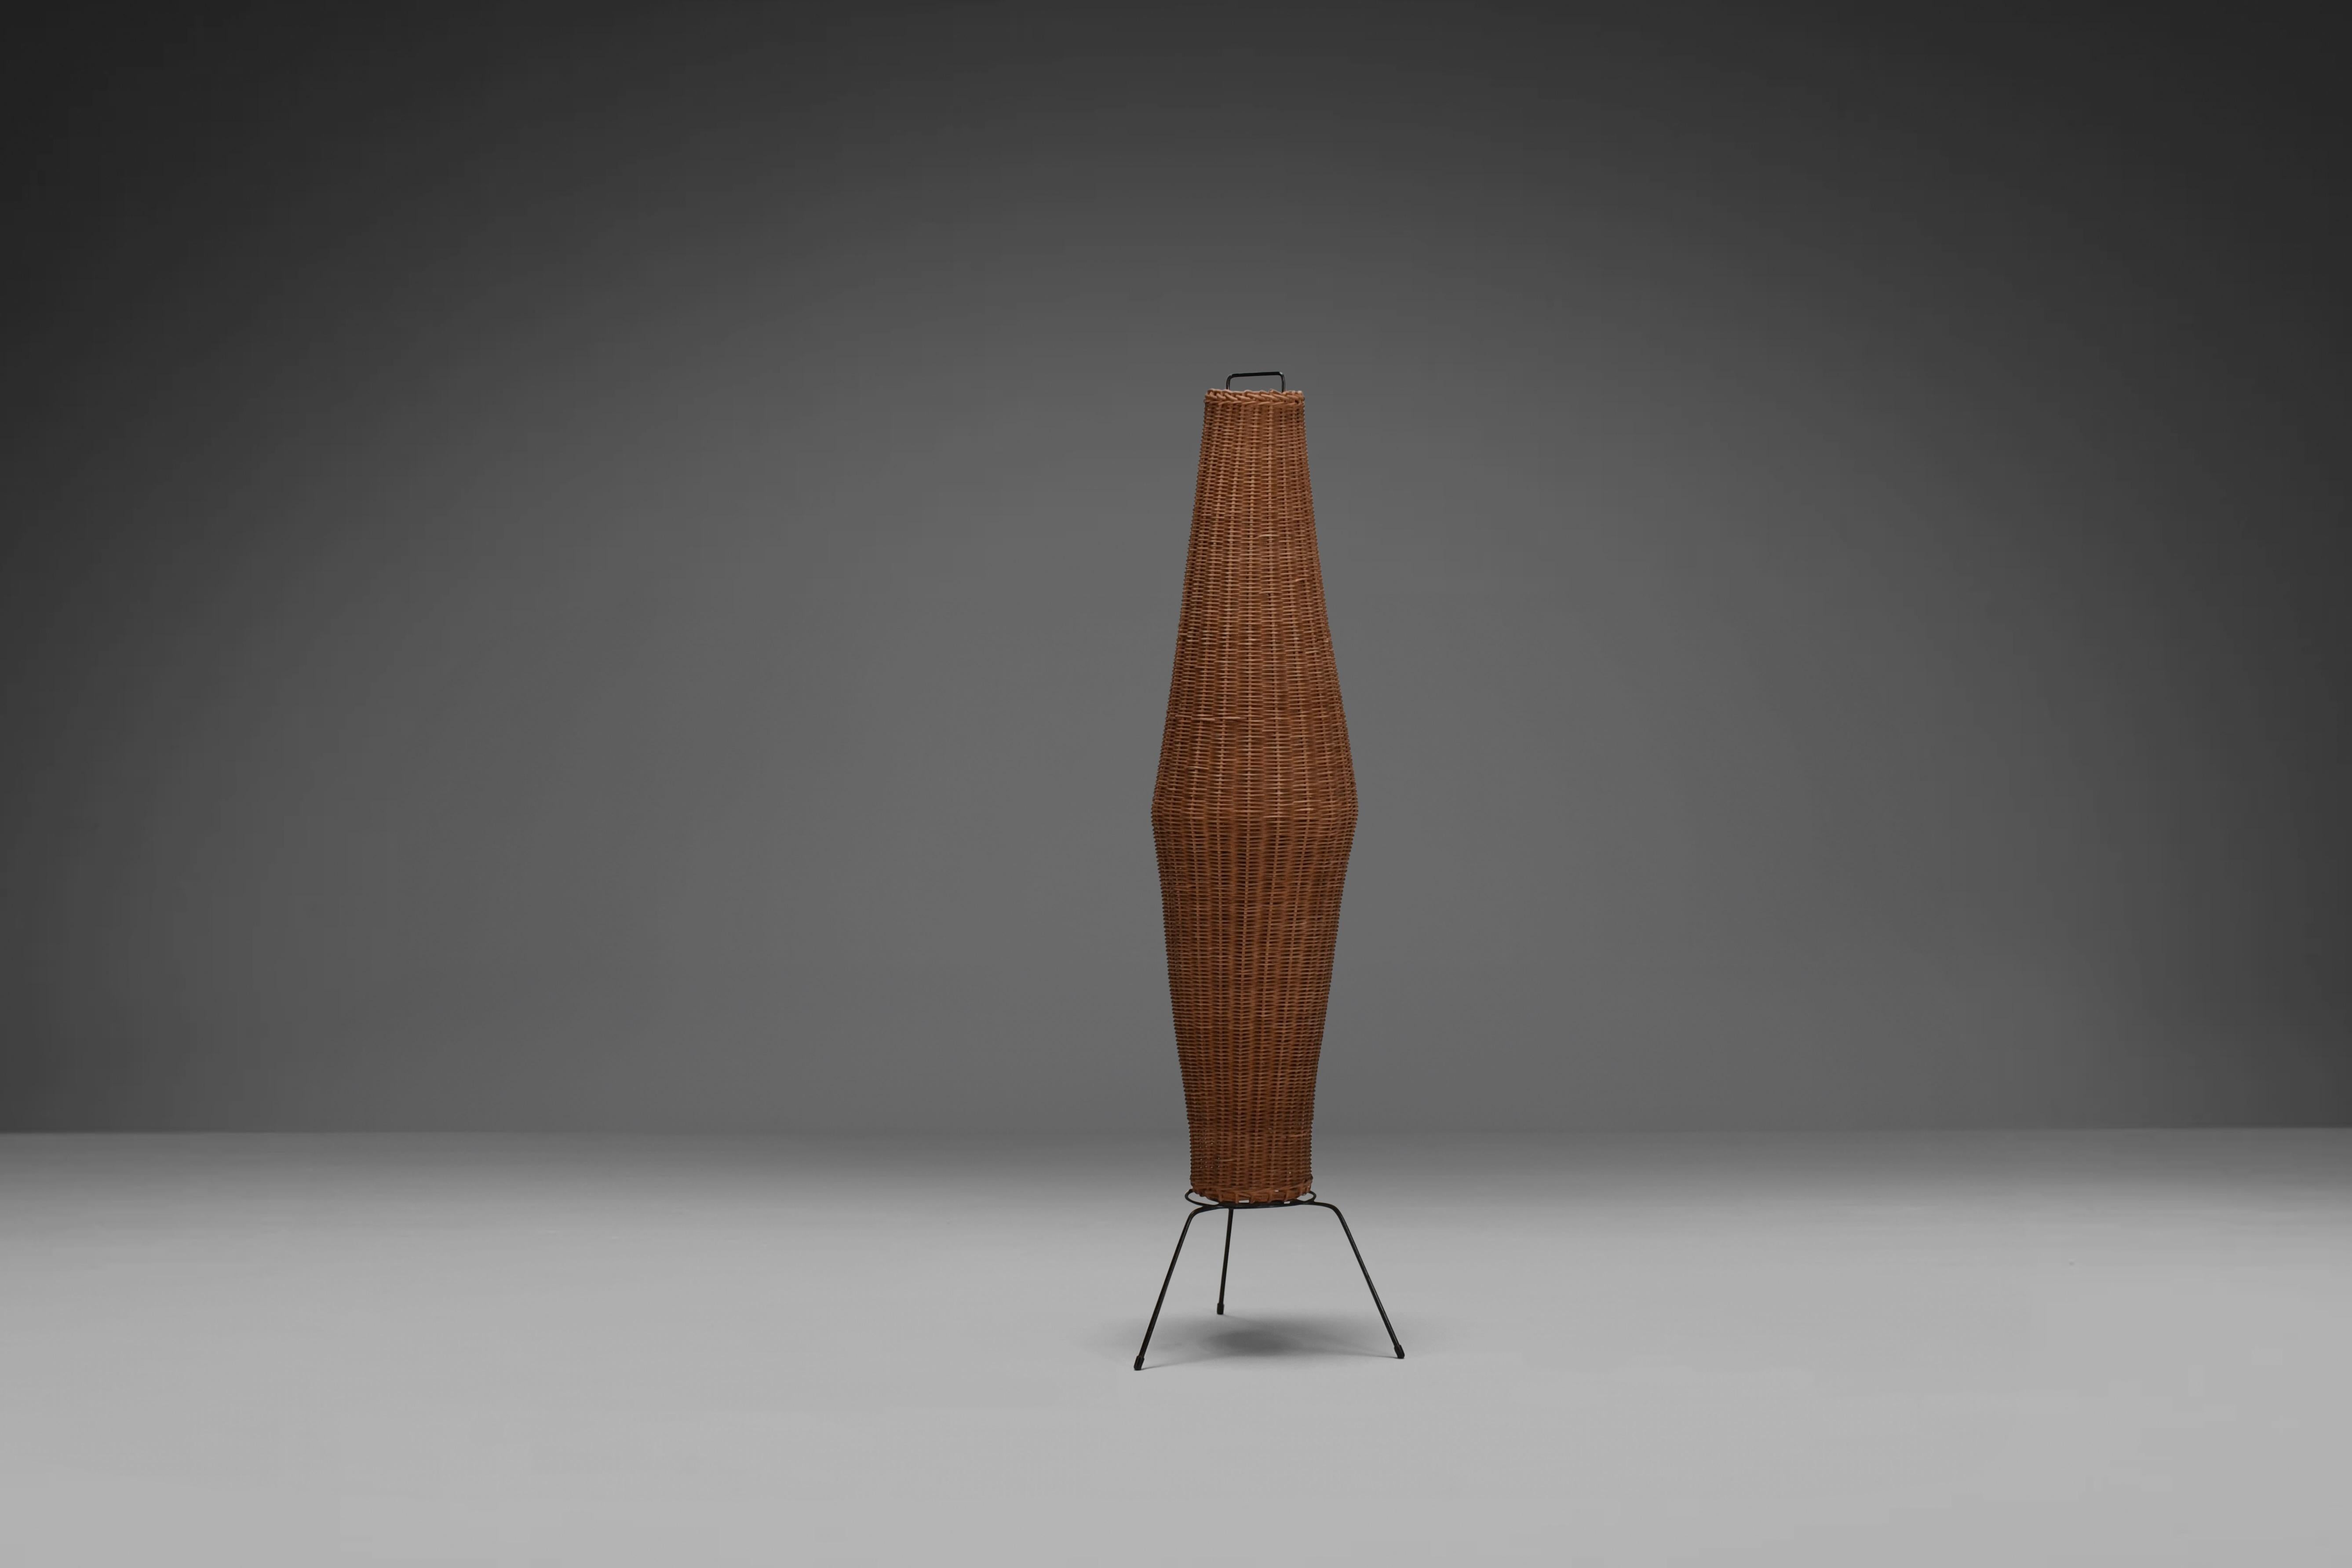 French Tripod Woven Rattan Basket Floor Lamp, France, 1950s For Sale